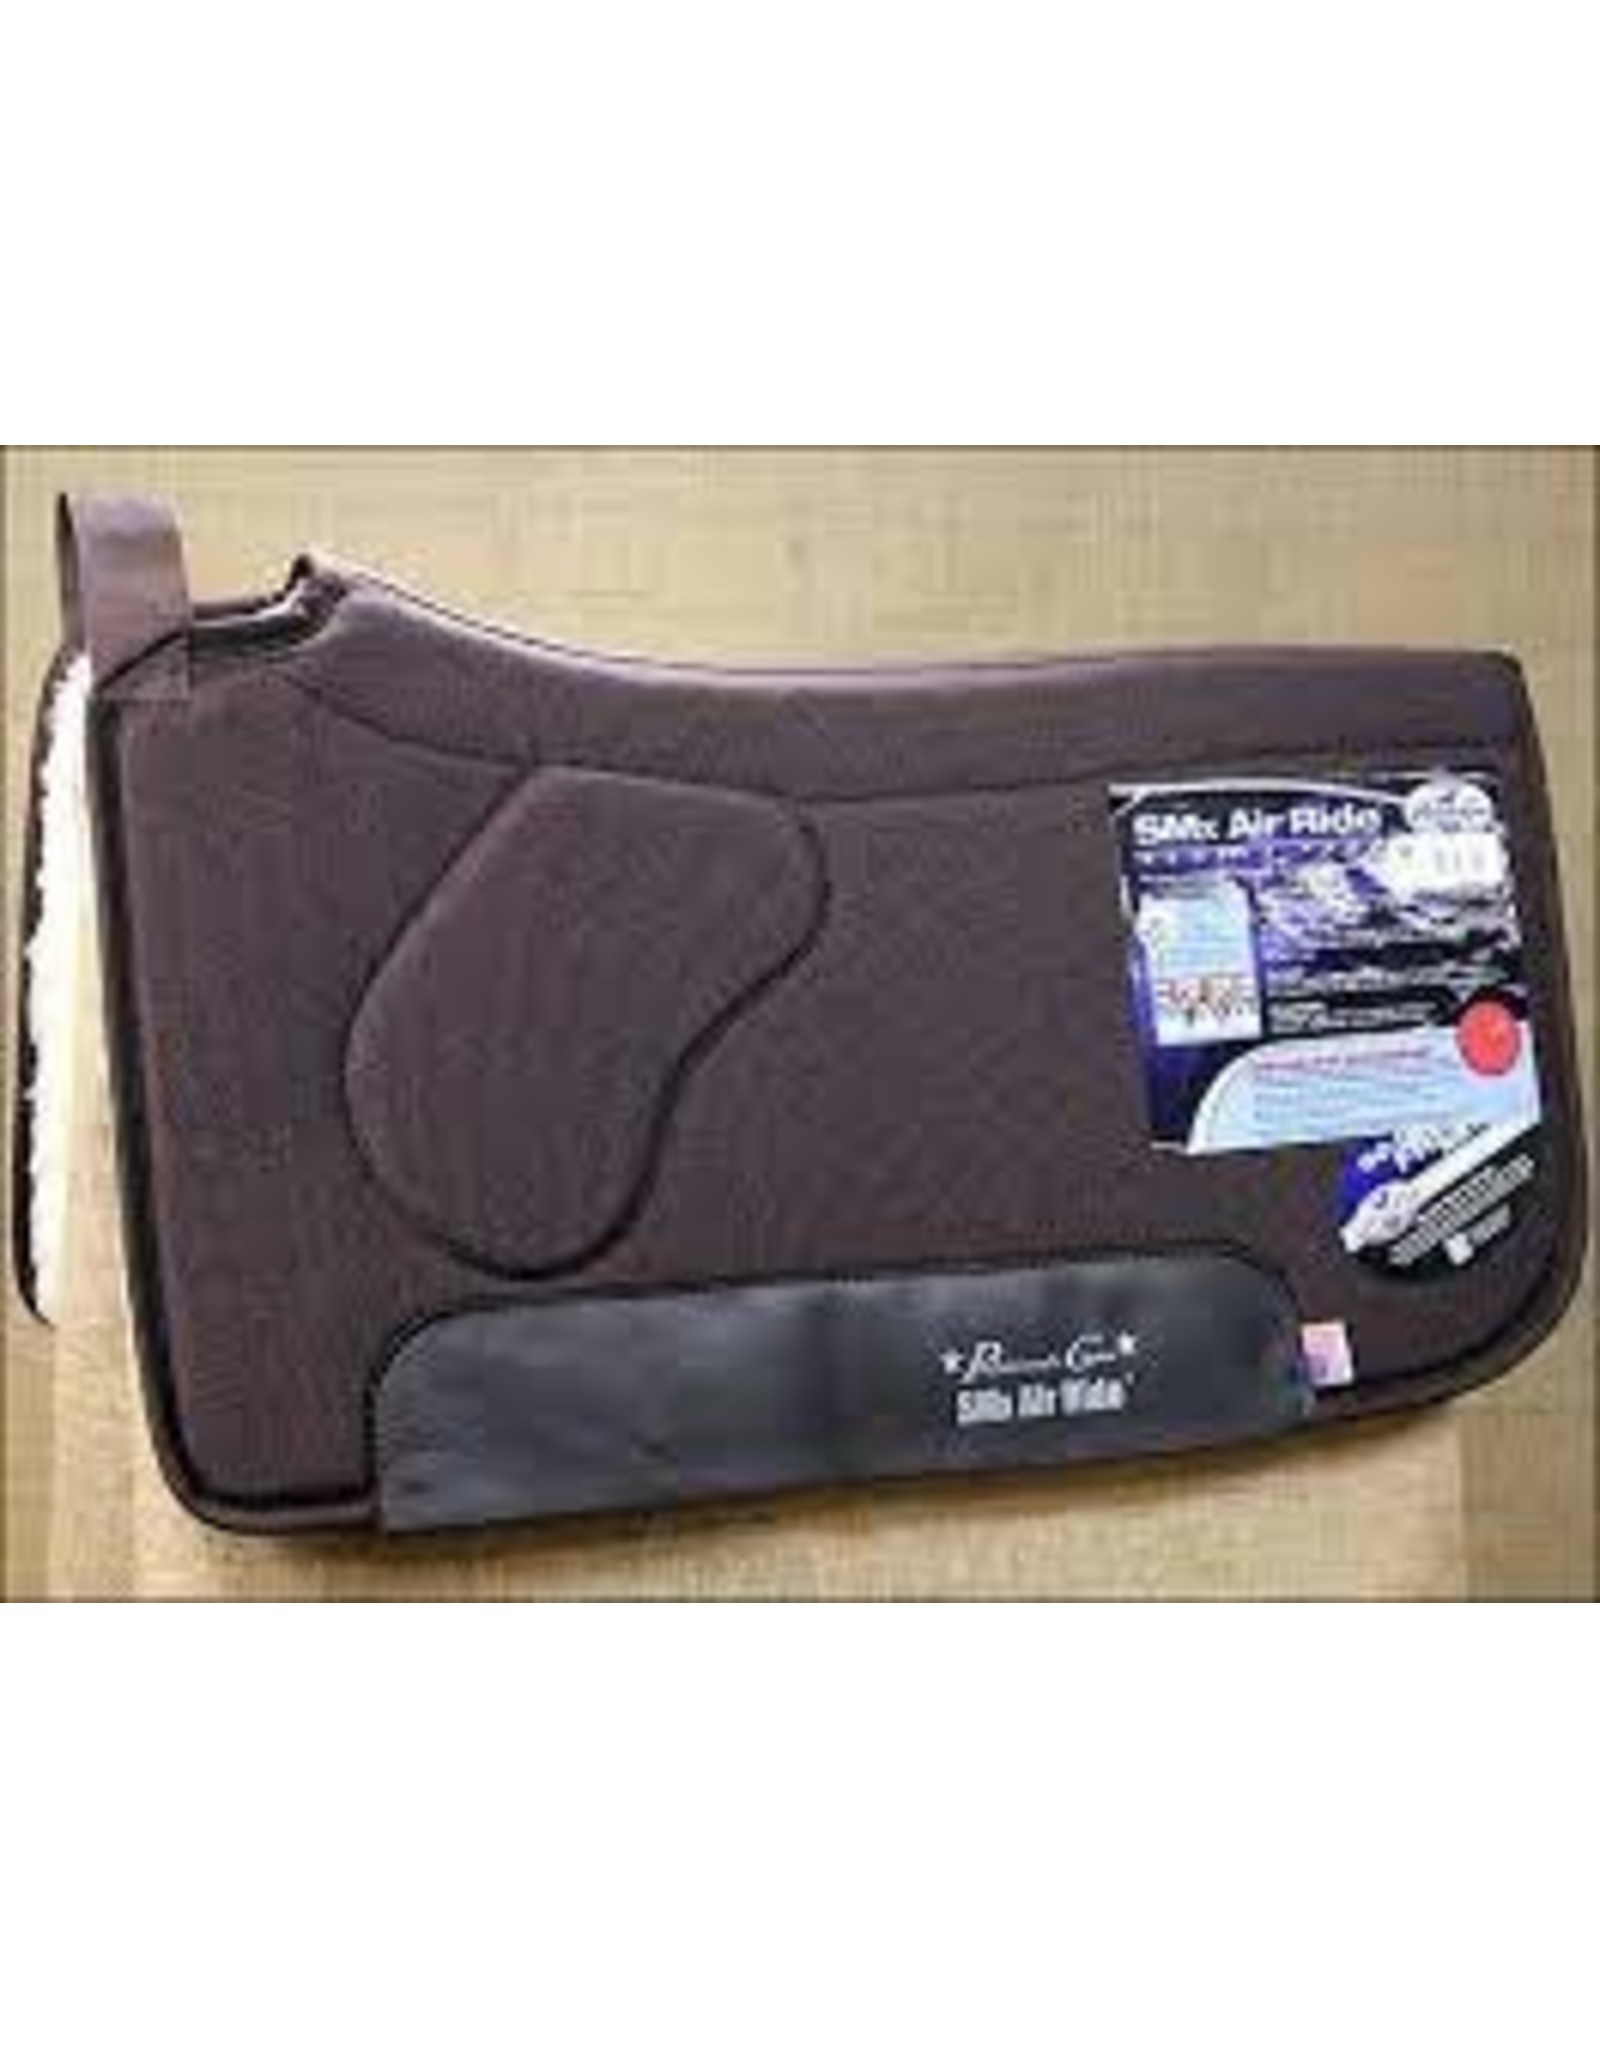 Professional's Choice SMx Air Ride O Sport Saddle Pad - 33x35 - BROWN ARSP-33 BROWN